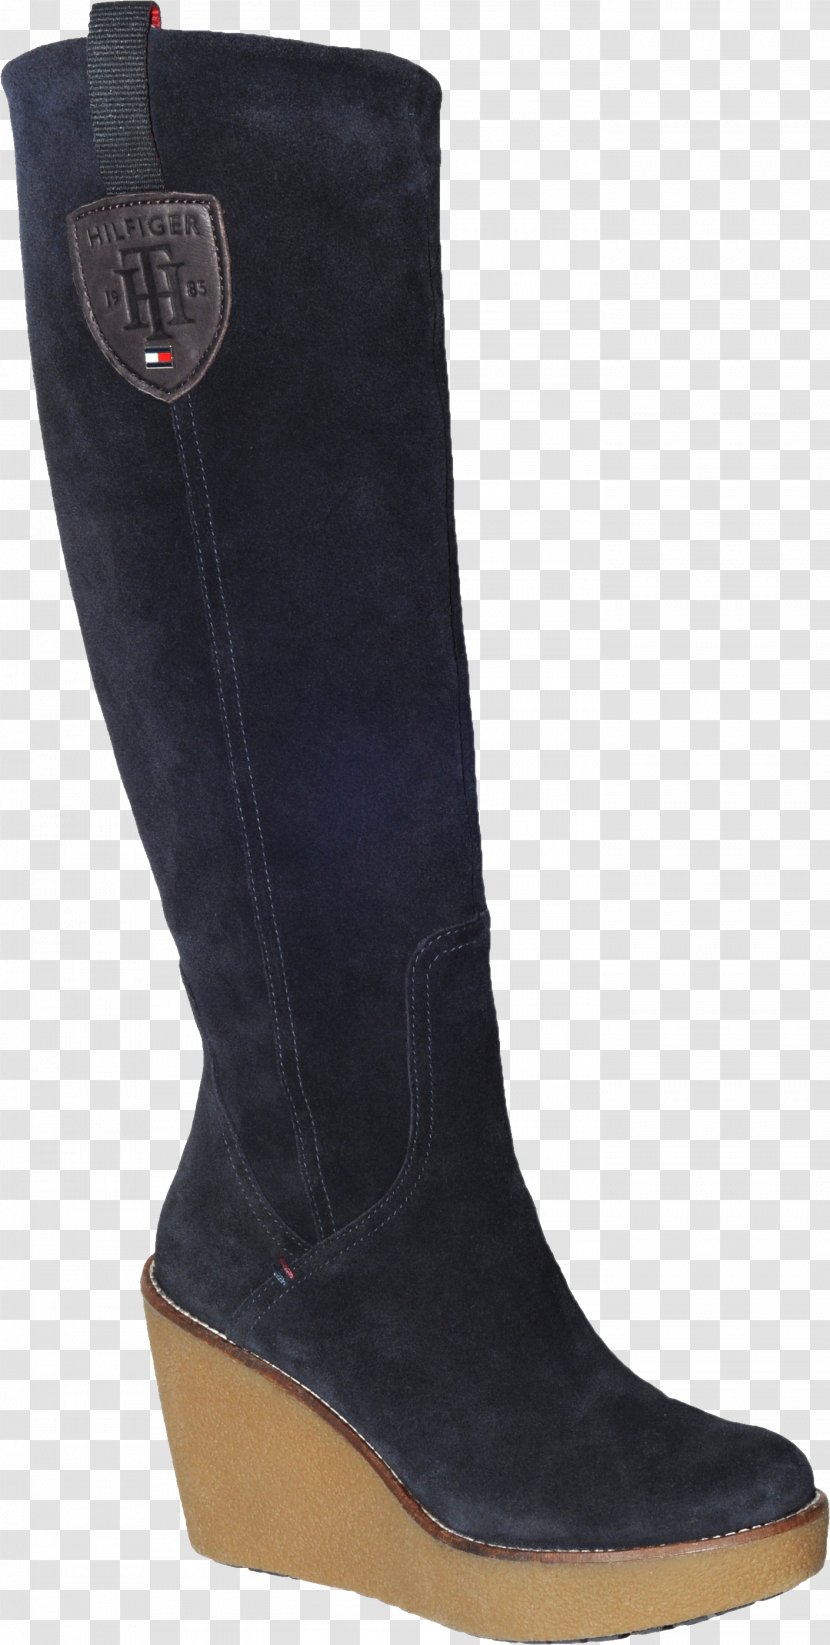 Booting Shoe Jeans Footwear - Dress Boot - Boots Image Transparent PNG